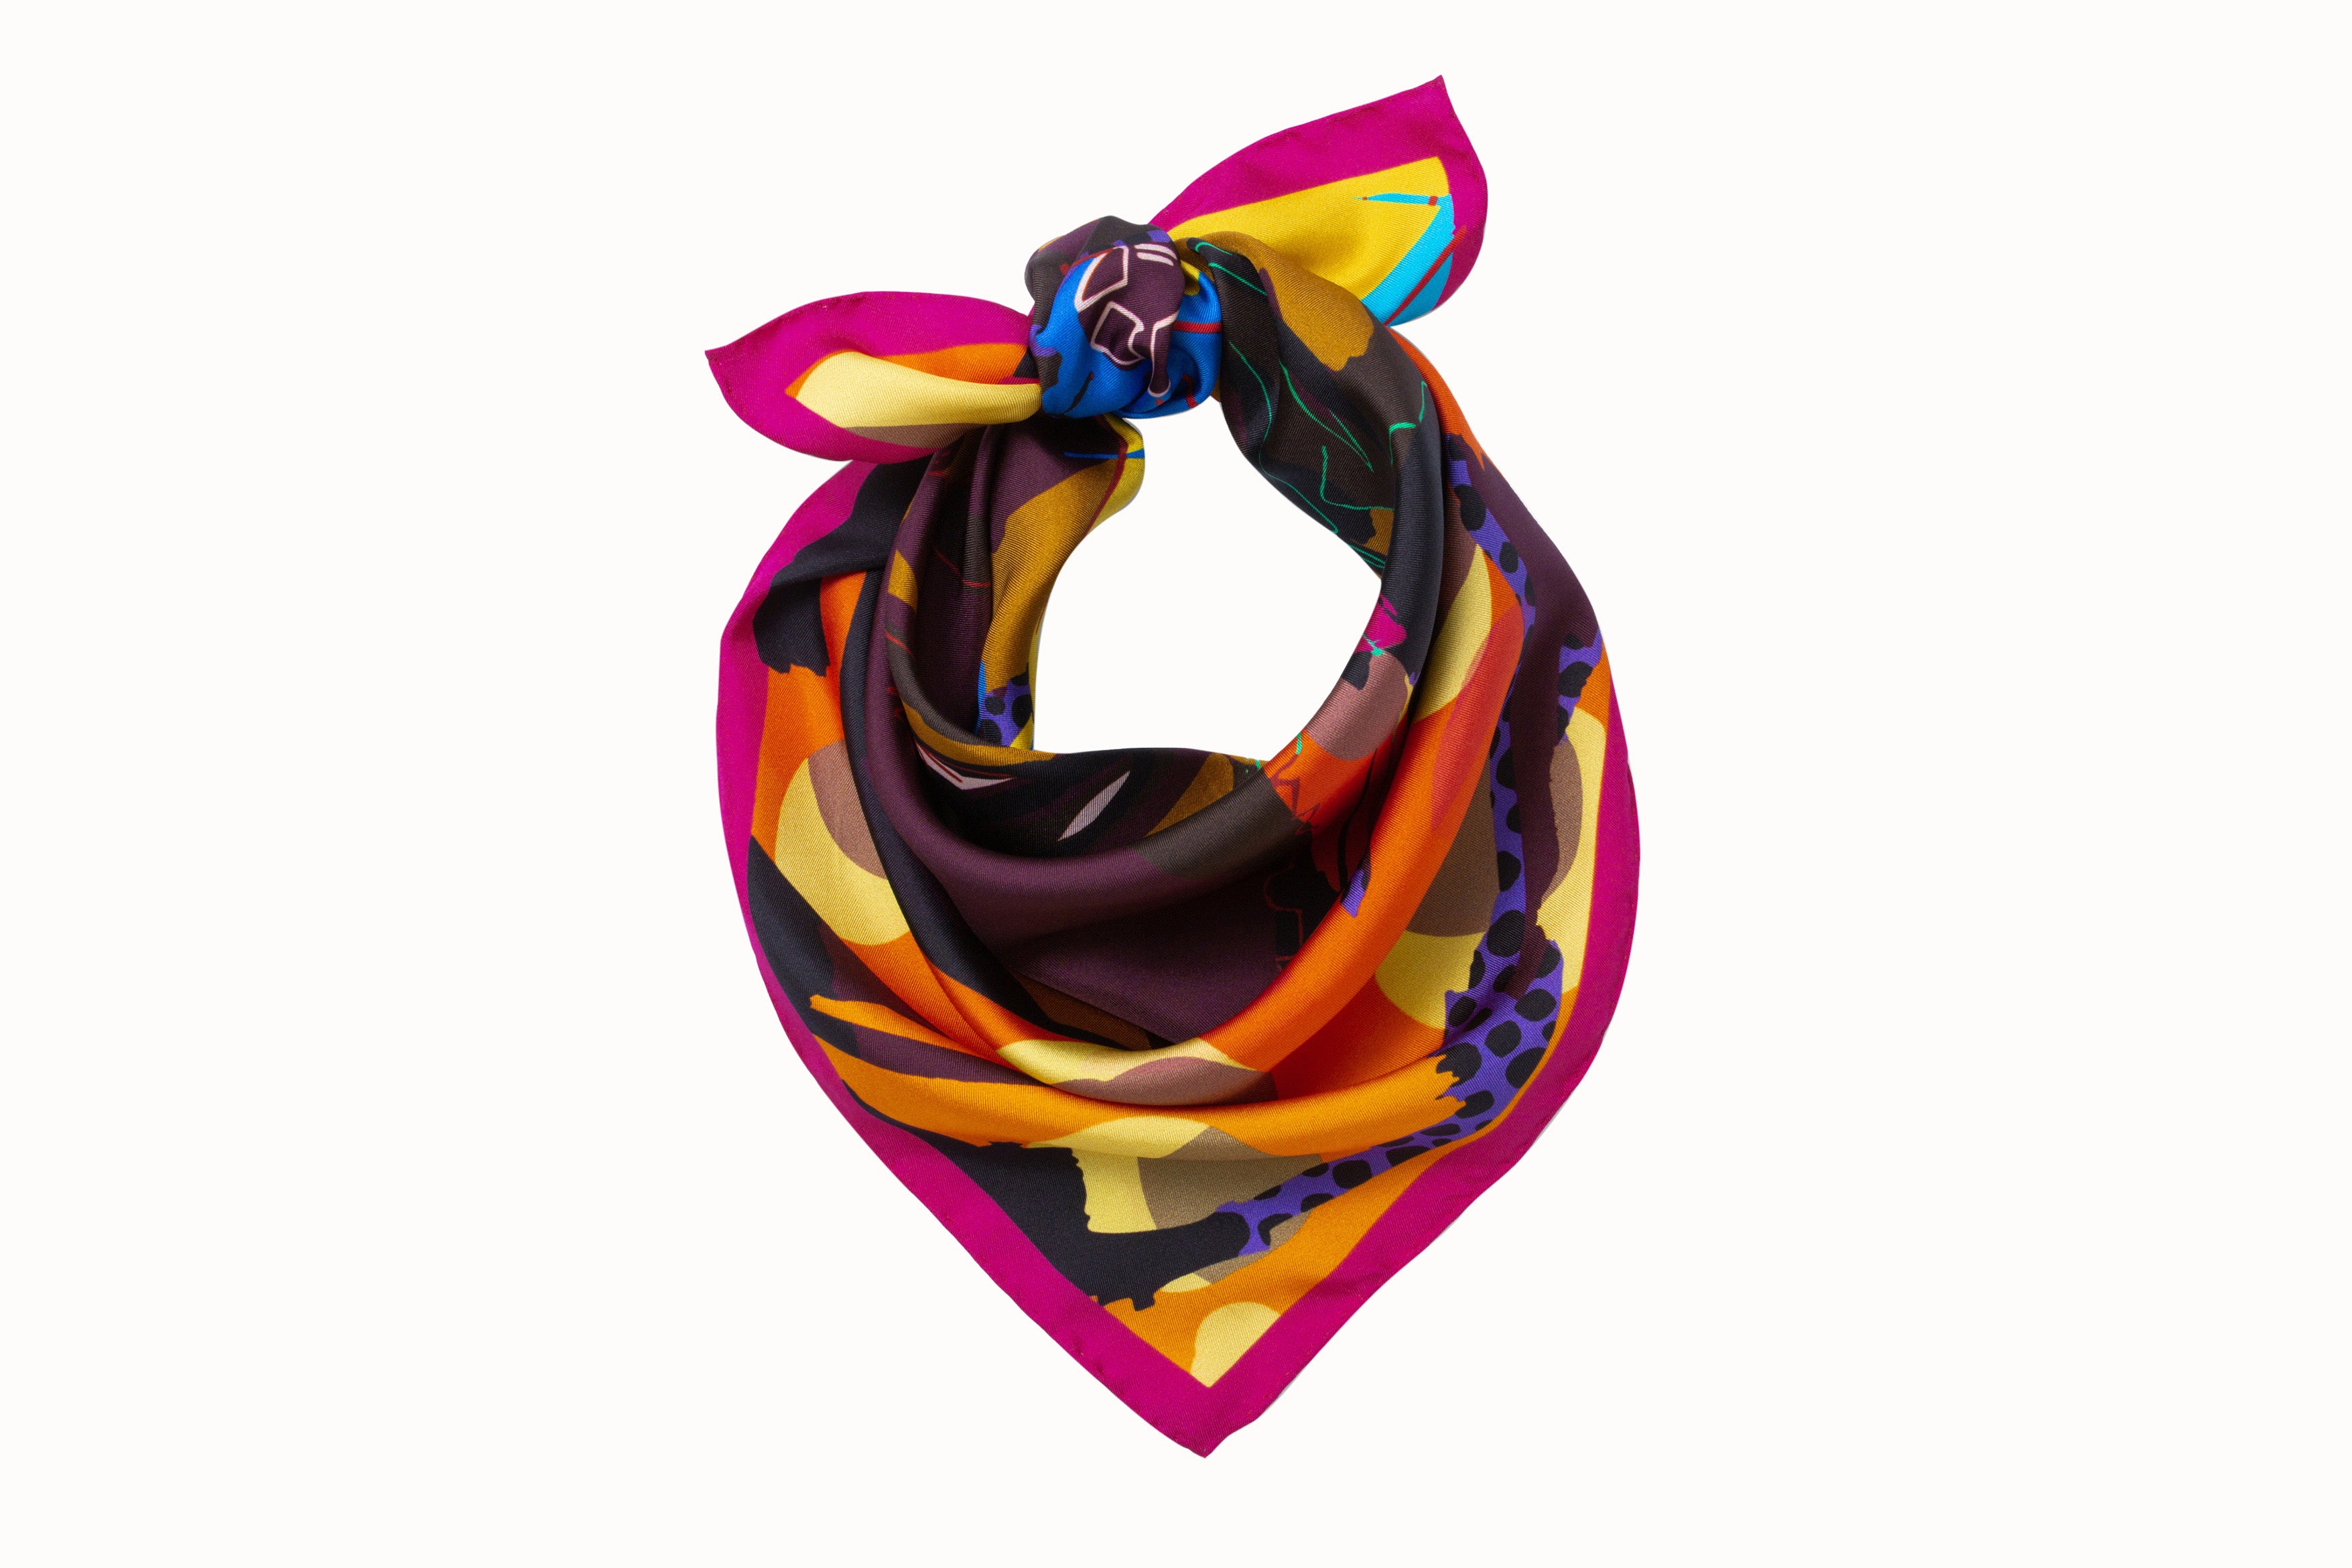 Rolled image of 100% silk square scarf featuring the artist’s portrait of Nina Simone surrounded by bold geometric shapes and featuring such colors as tangerine, citrus yellow, bright blue, burgundy and deep mahogany.